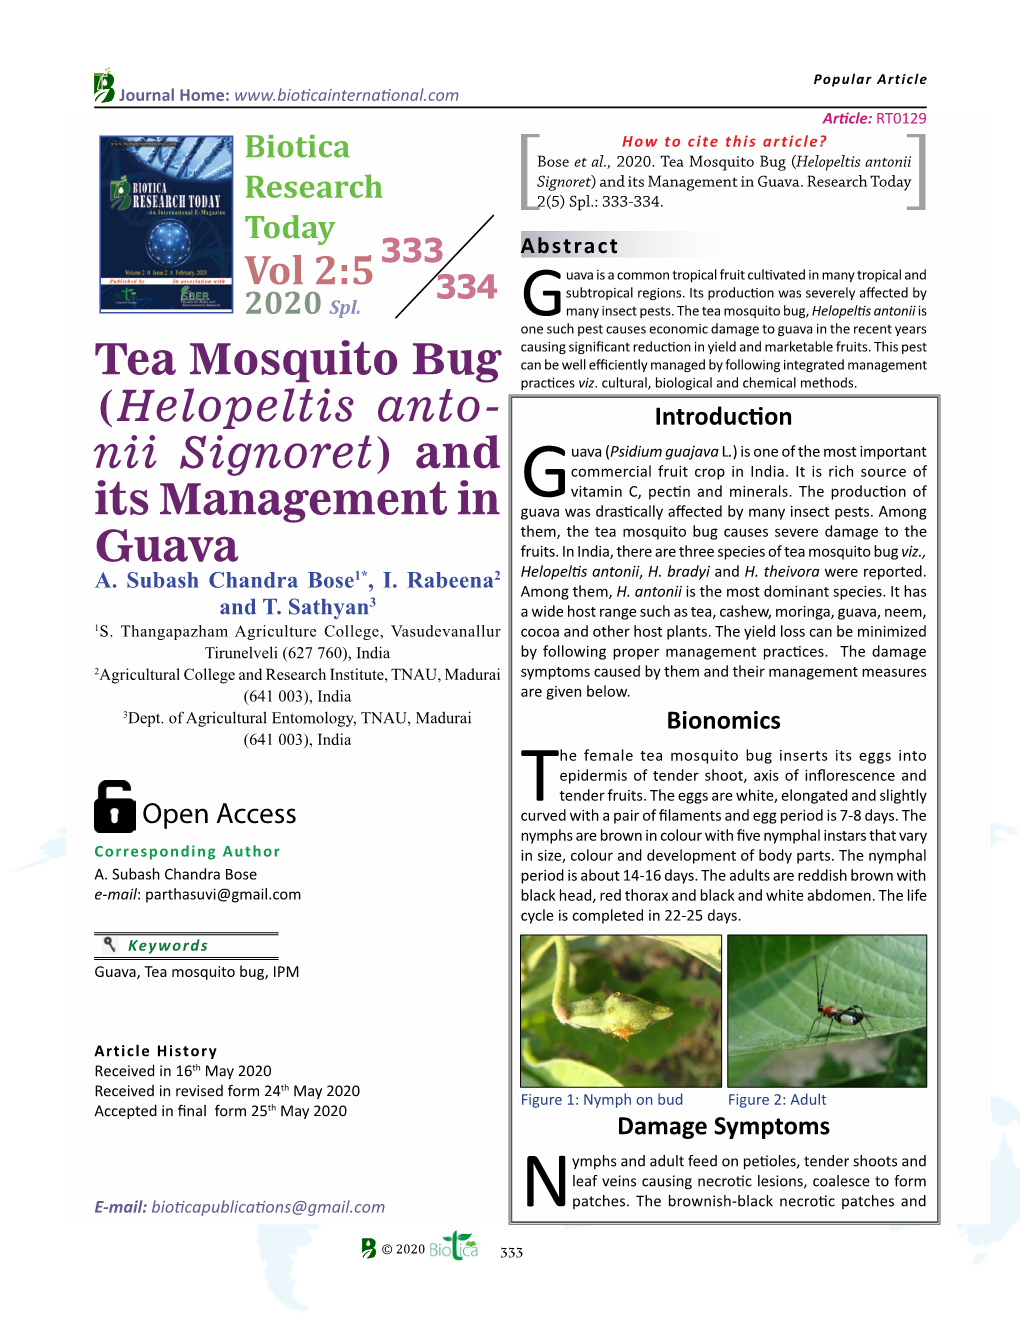 Tea Mosquito Bug (Helopeltis Anto- Nii Signoret) and Its Management in Guava